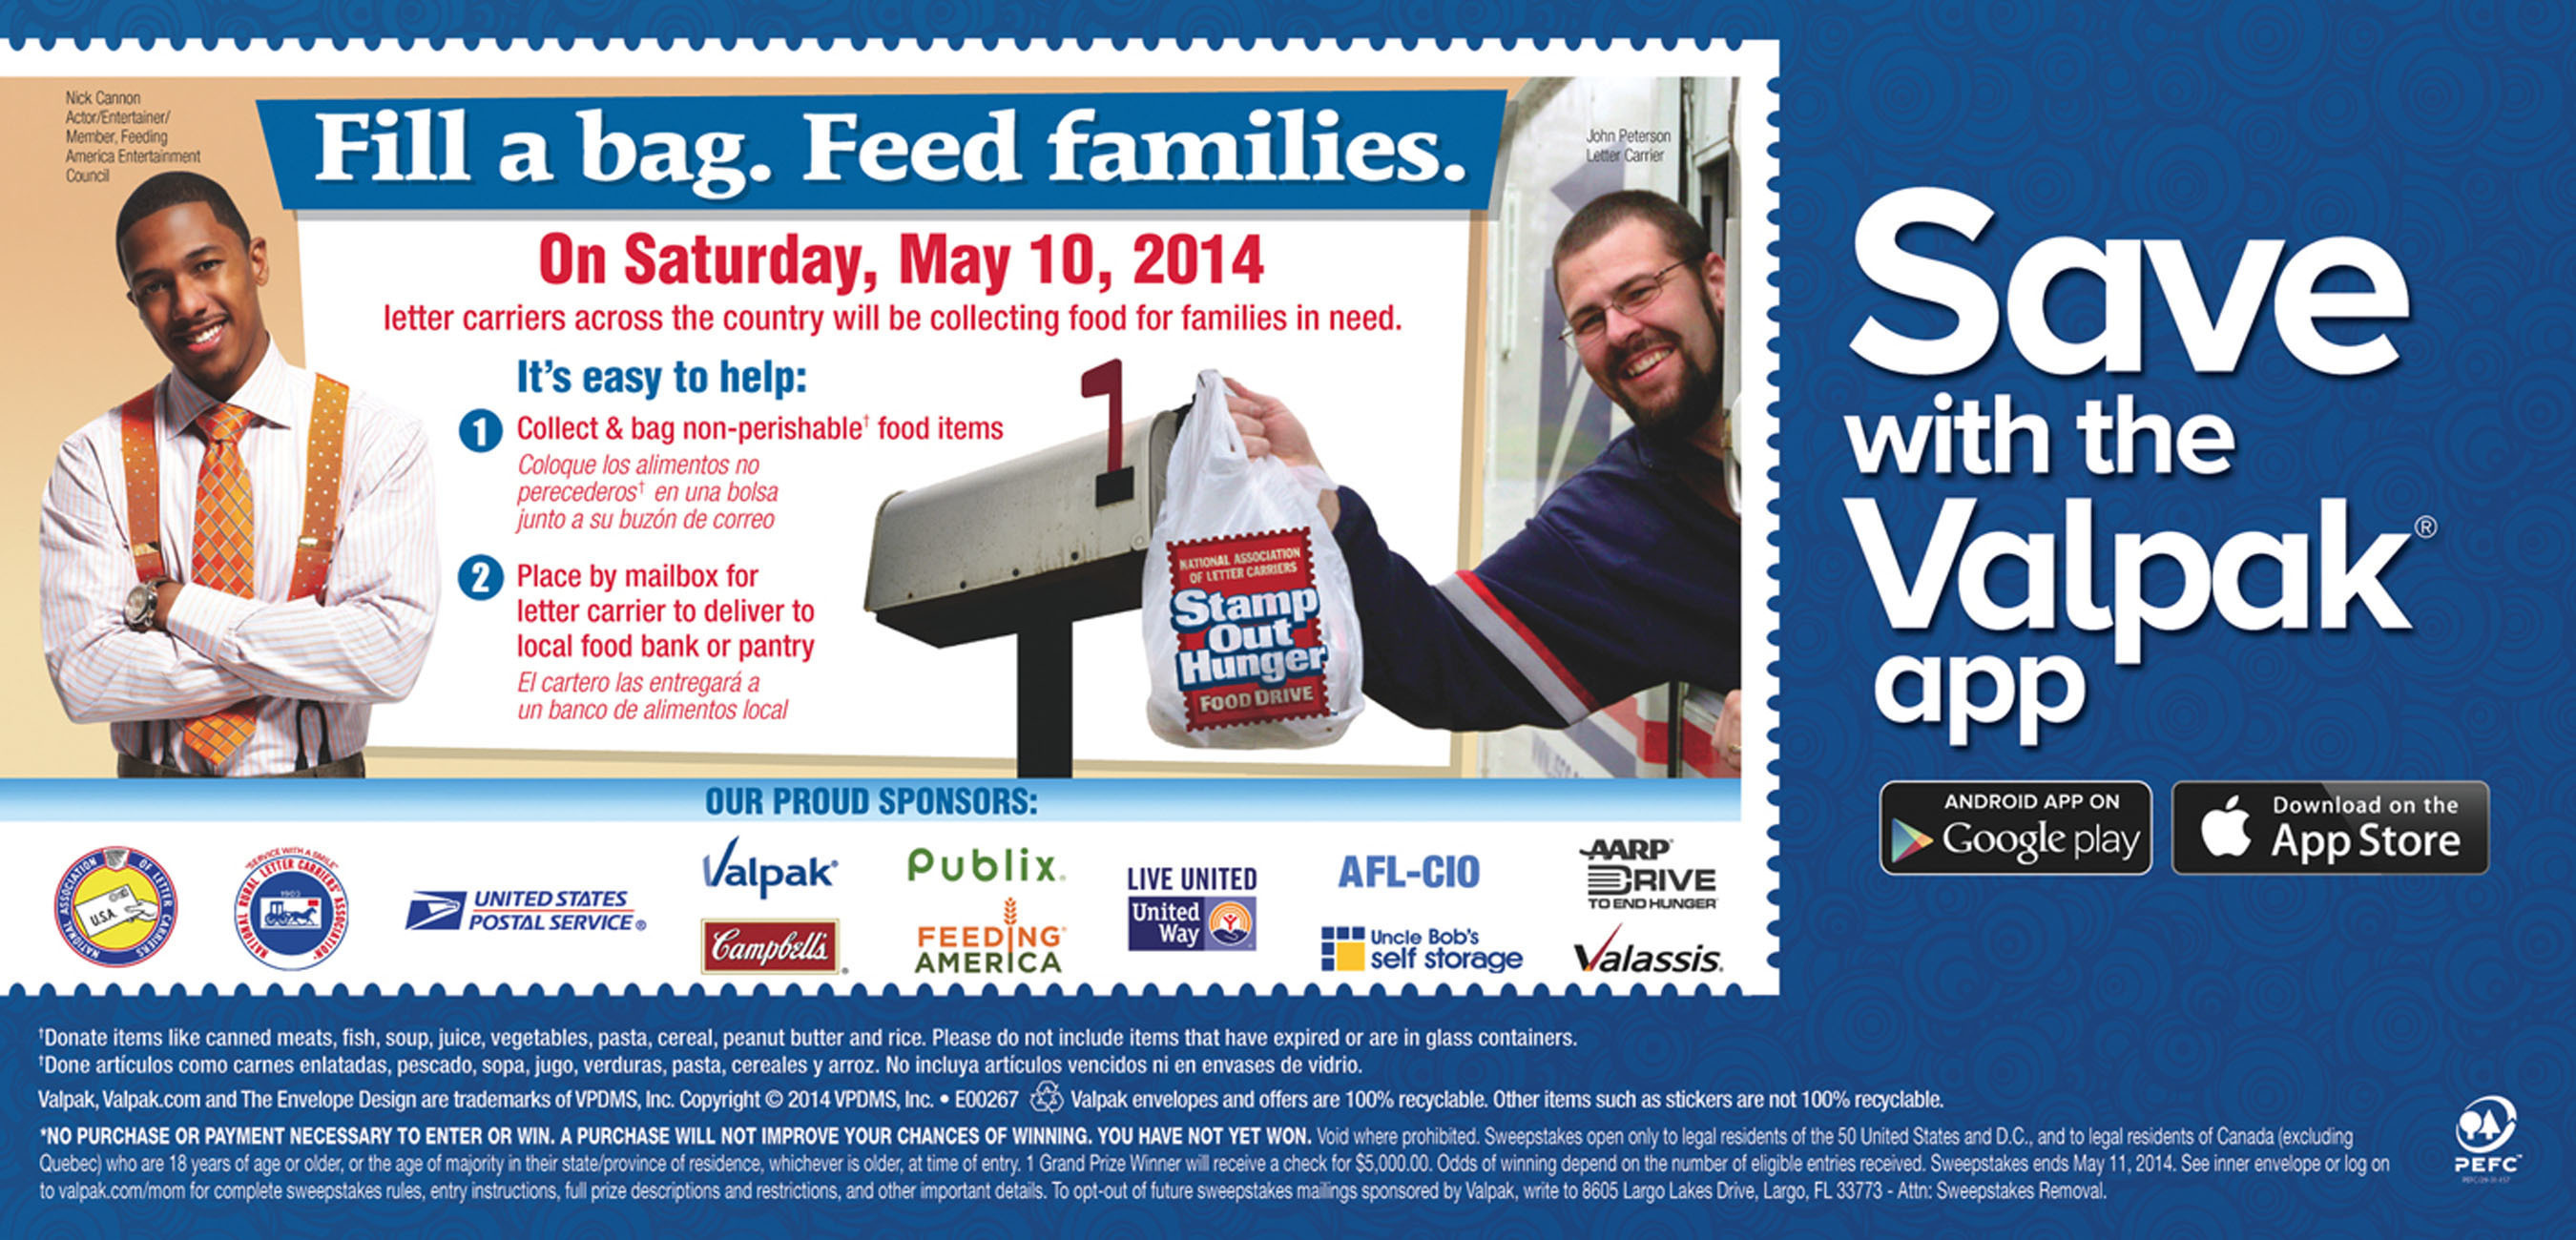 Valpak reminds you to fill a bag, feed families on Saturday, May 10. (PRNewsFoto/Valpak)